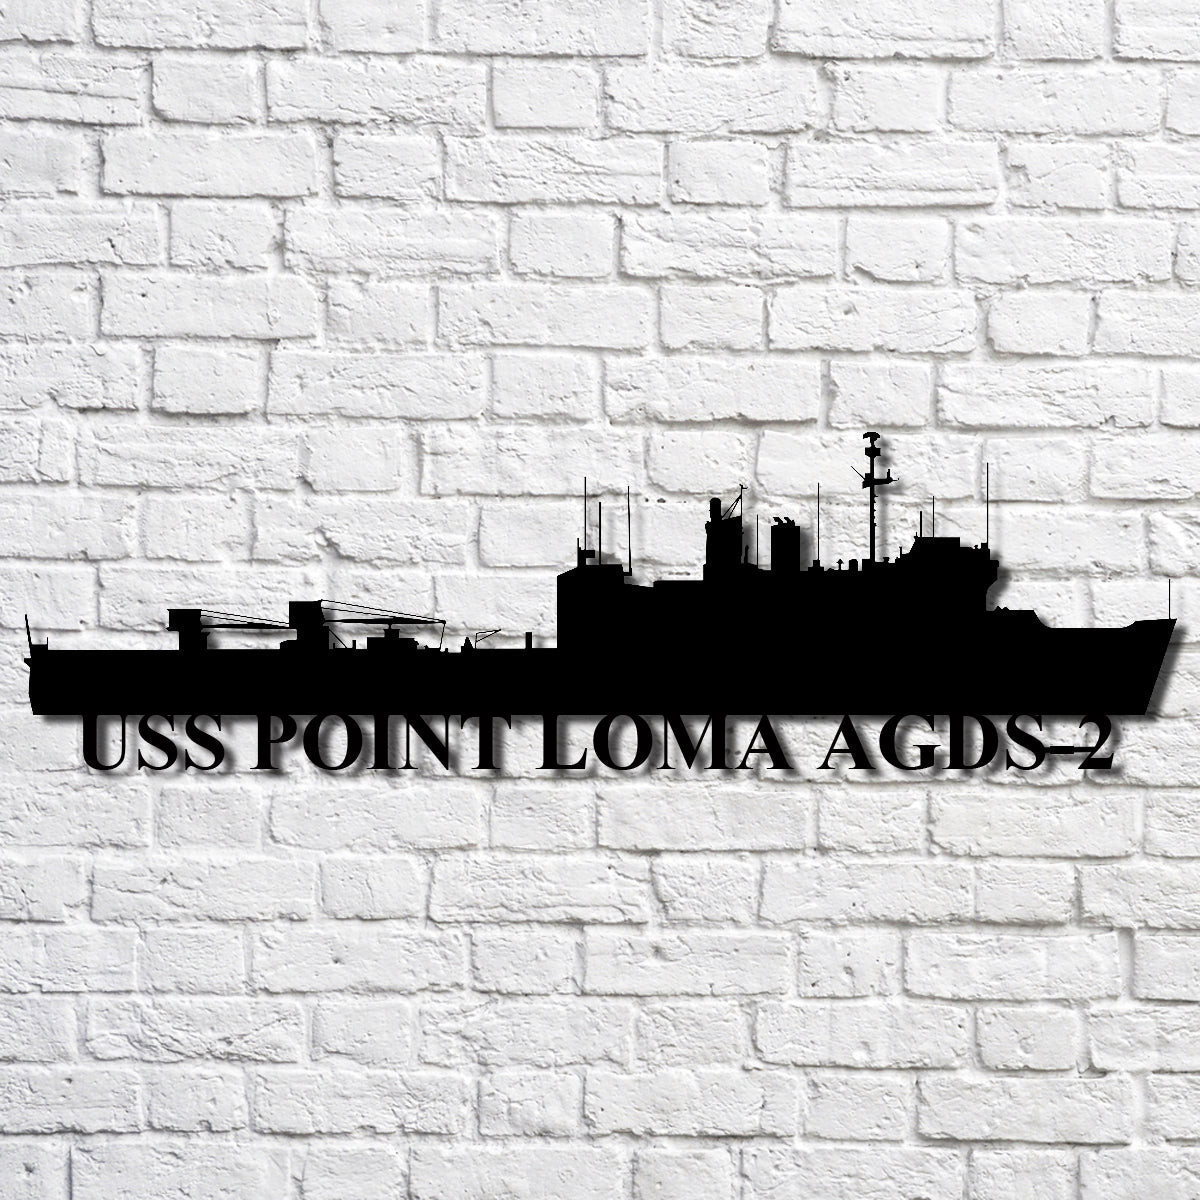 Uss Point Loma Agds2 Navy Ship Metal Art, Gift For Navy Veteran, Navy Ships Silhouette Metal Art, Navy Home Decor Laser Cut Metal Signs Custom Gift Ideas 12x12IN